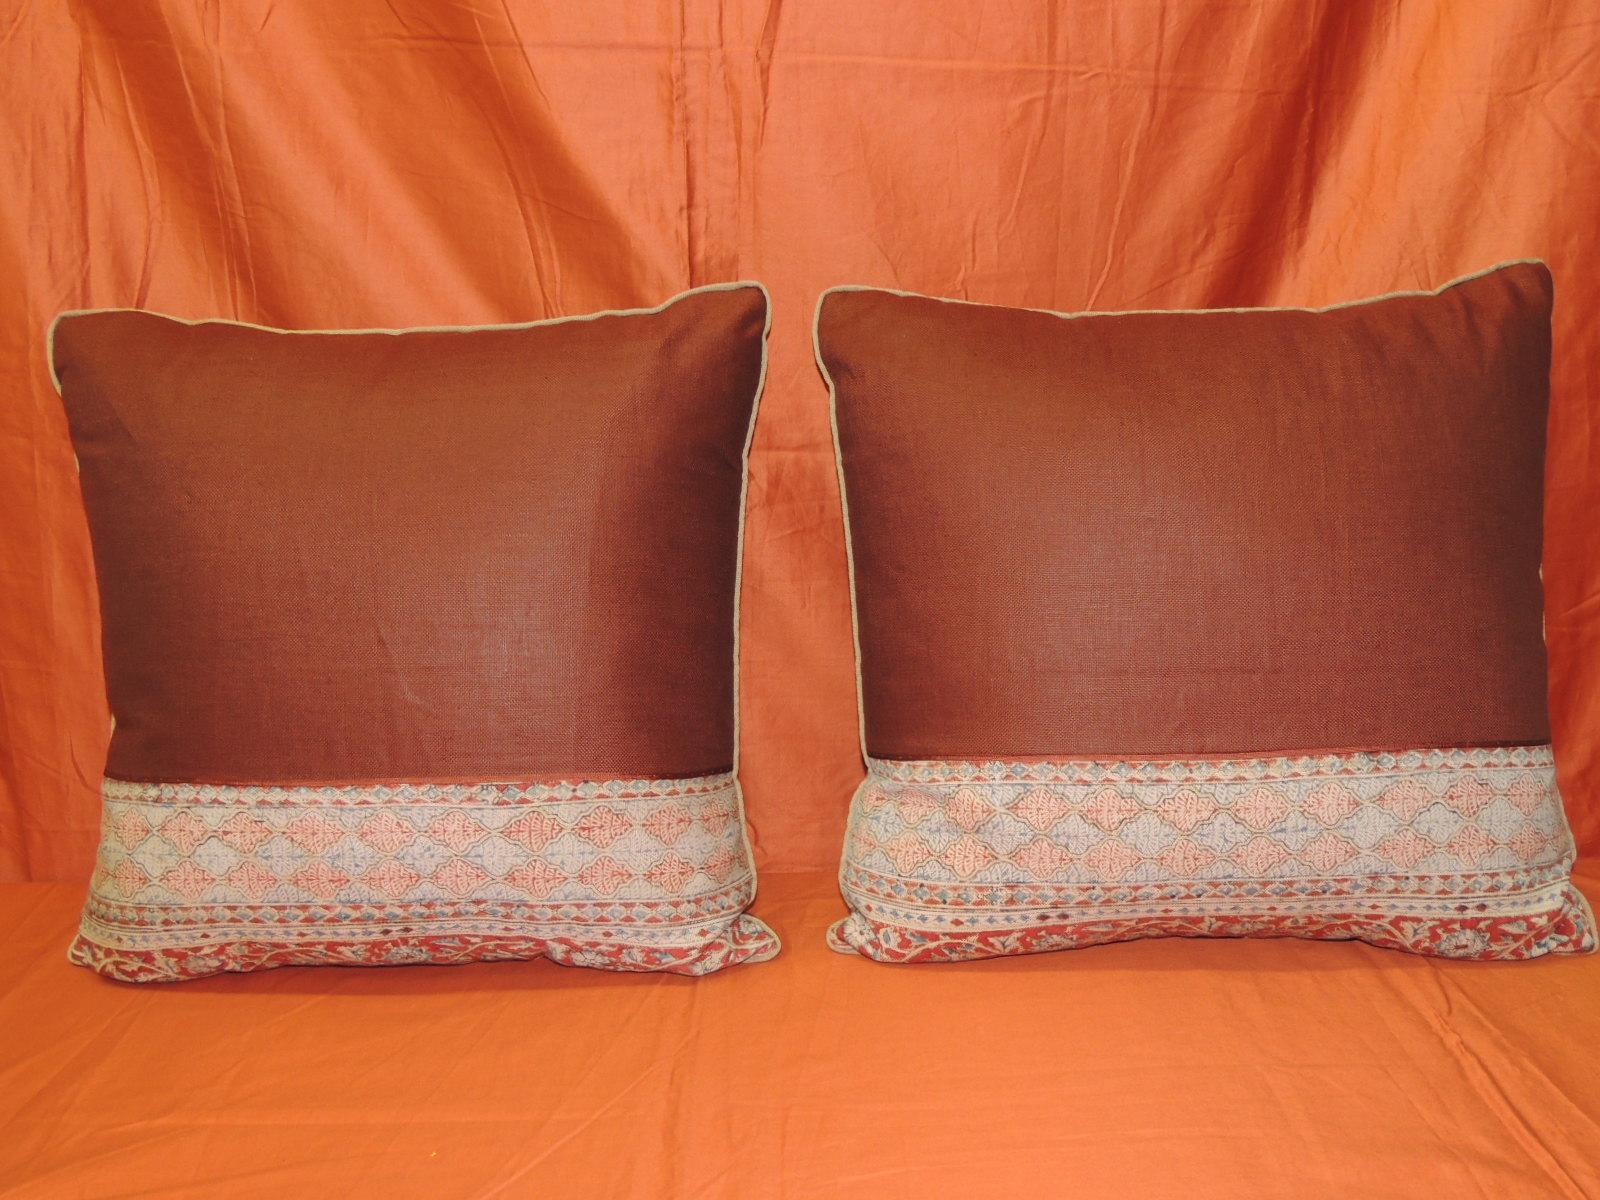 Pair of vintage Kalamkari Indian square decorative pillows.
Indian hand-blocked textile decorative pillow. Hand-blocked border at the bottom of the Kalamkari decorative pillow framed with rust-colored textured linen and embellished with a rust color